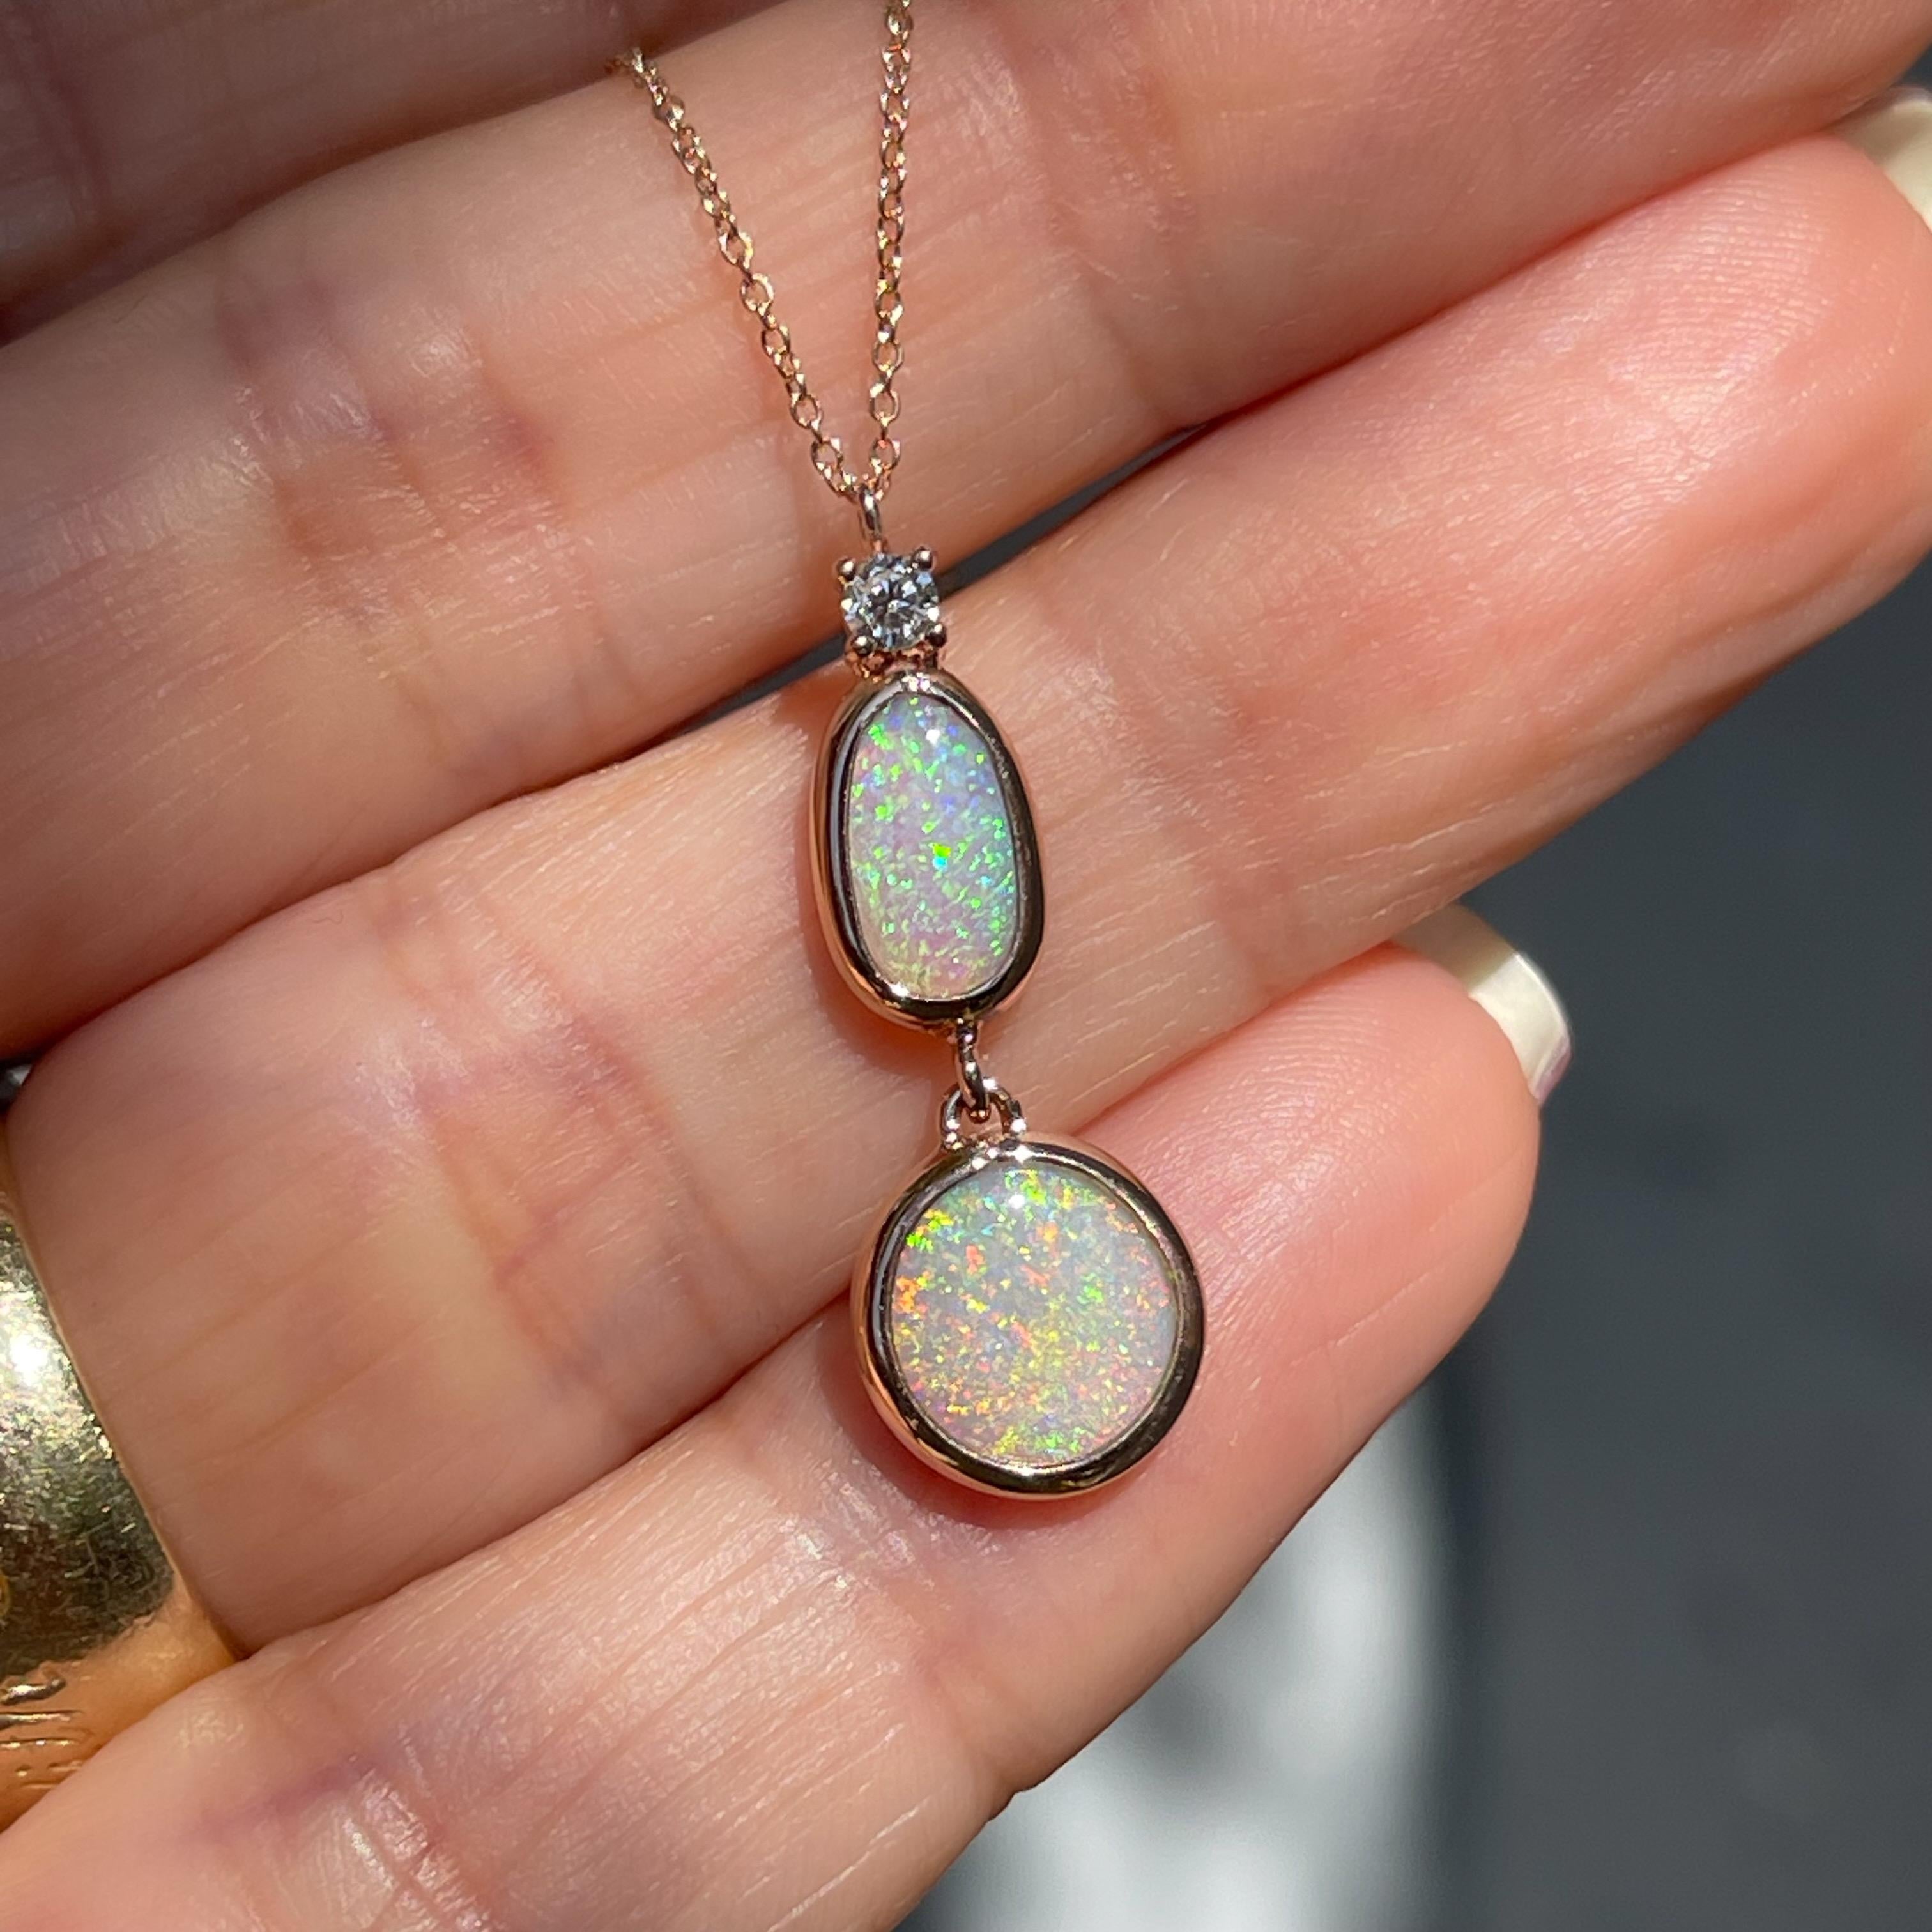 Contemporary NIXIN Jewelry Cadence Australian Opal Necklace with Diamond Pendant in Rose Gold